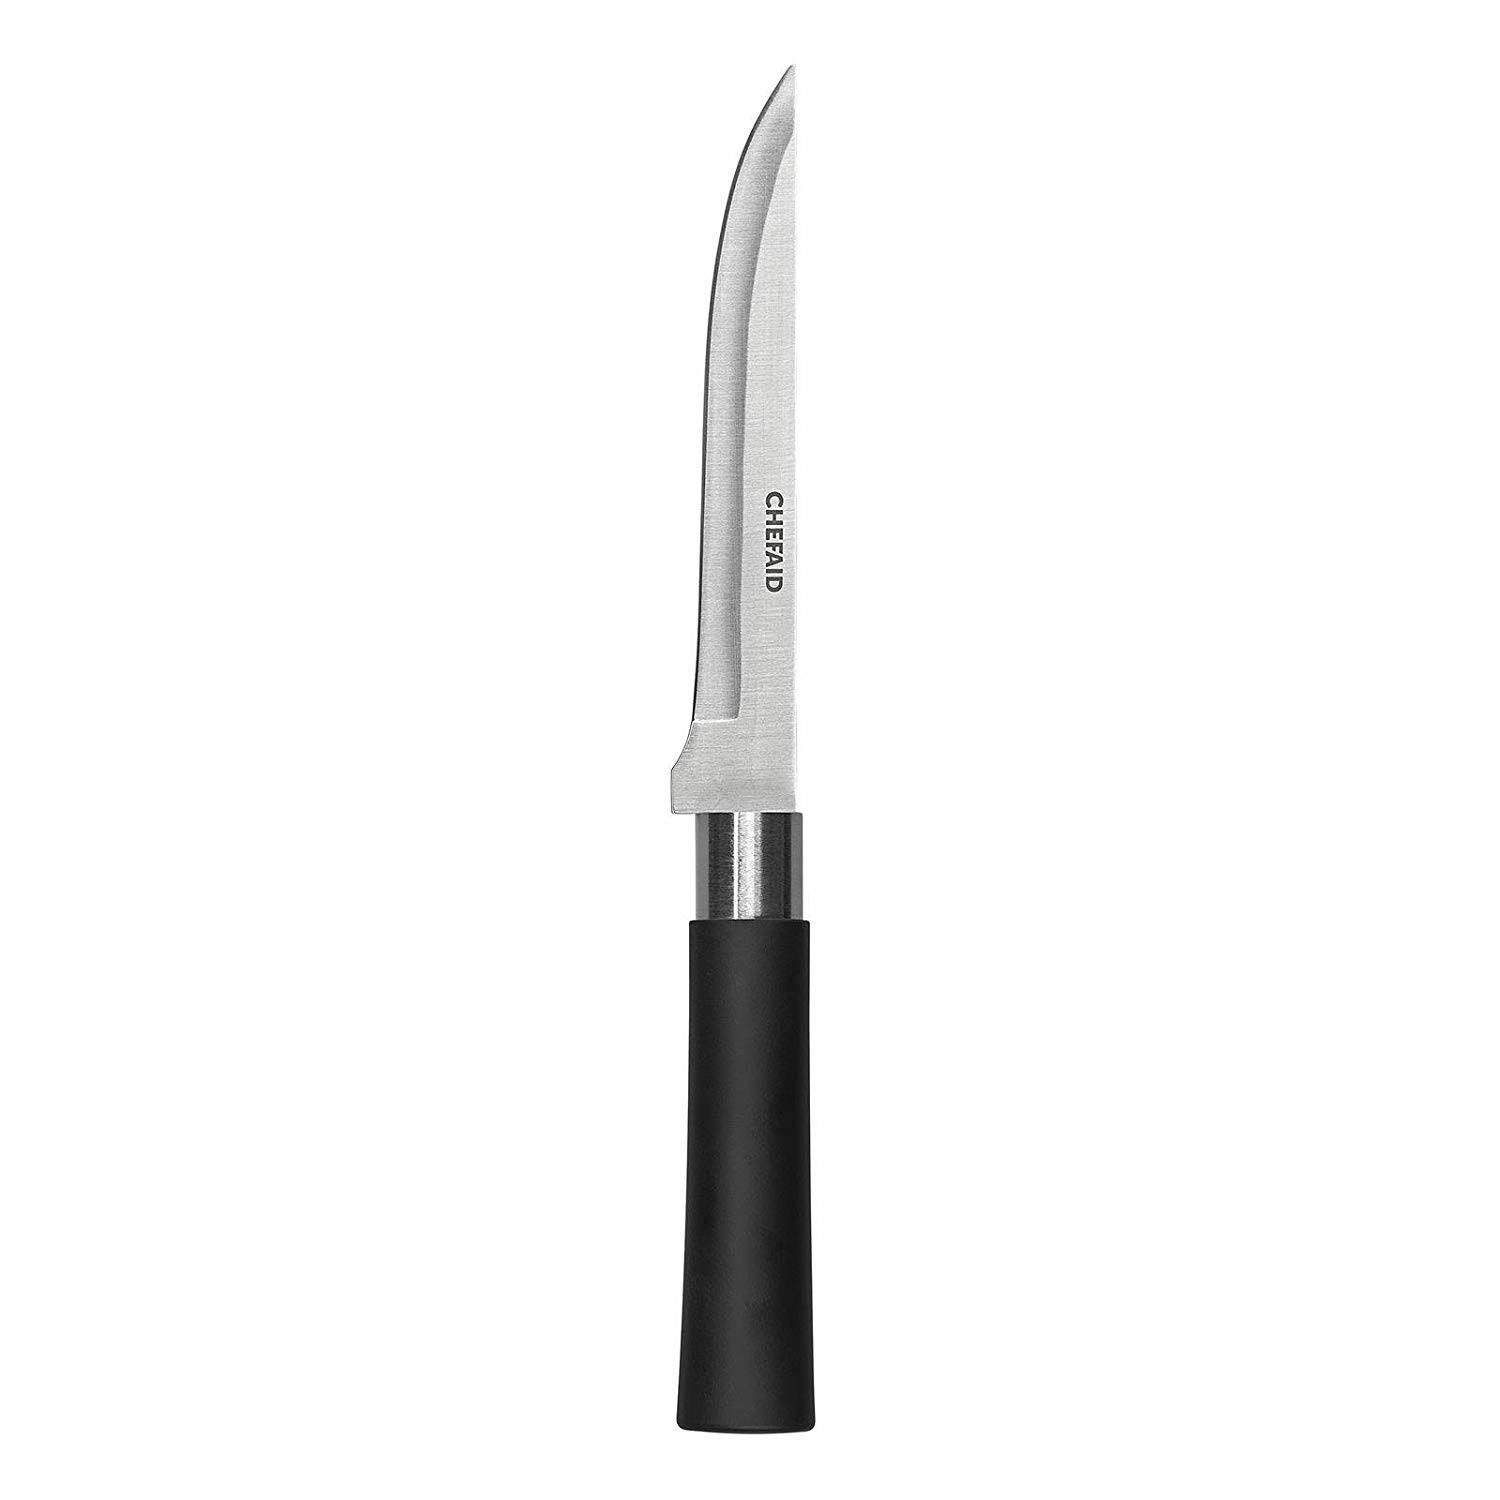 Chef Aid 15cm Filleting Knife with Soft Grip Handle